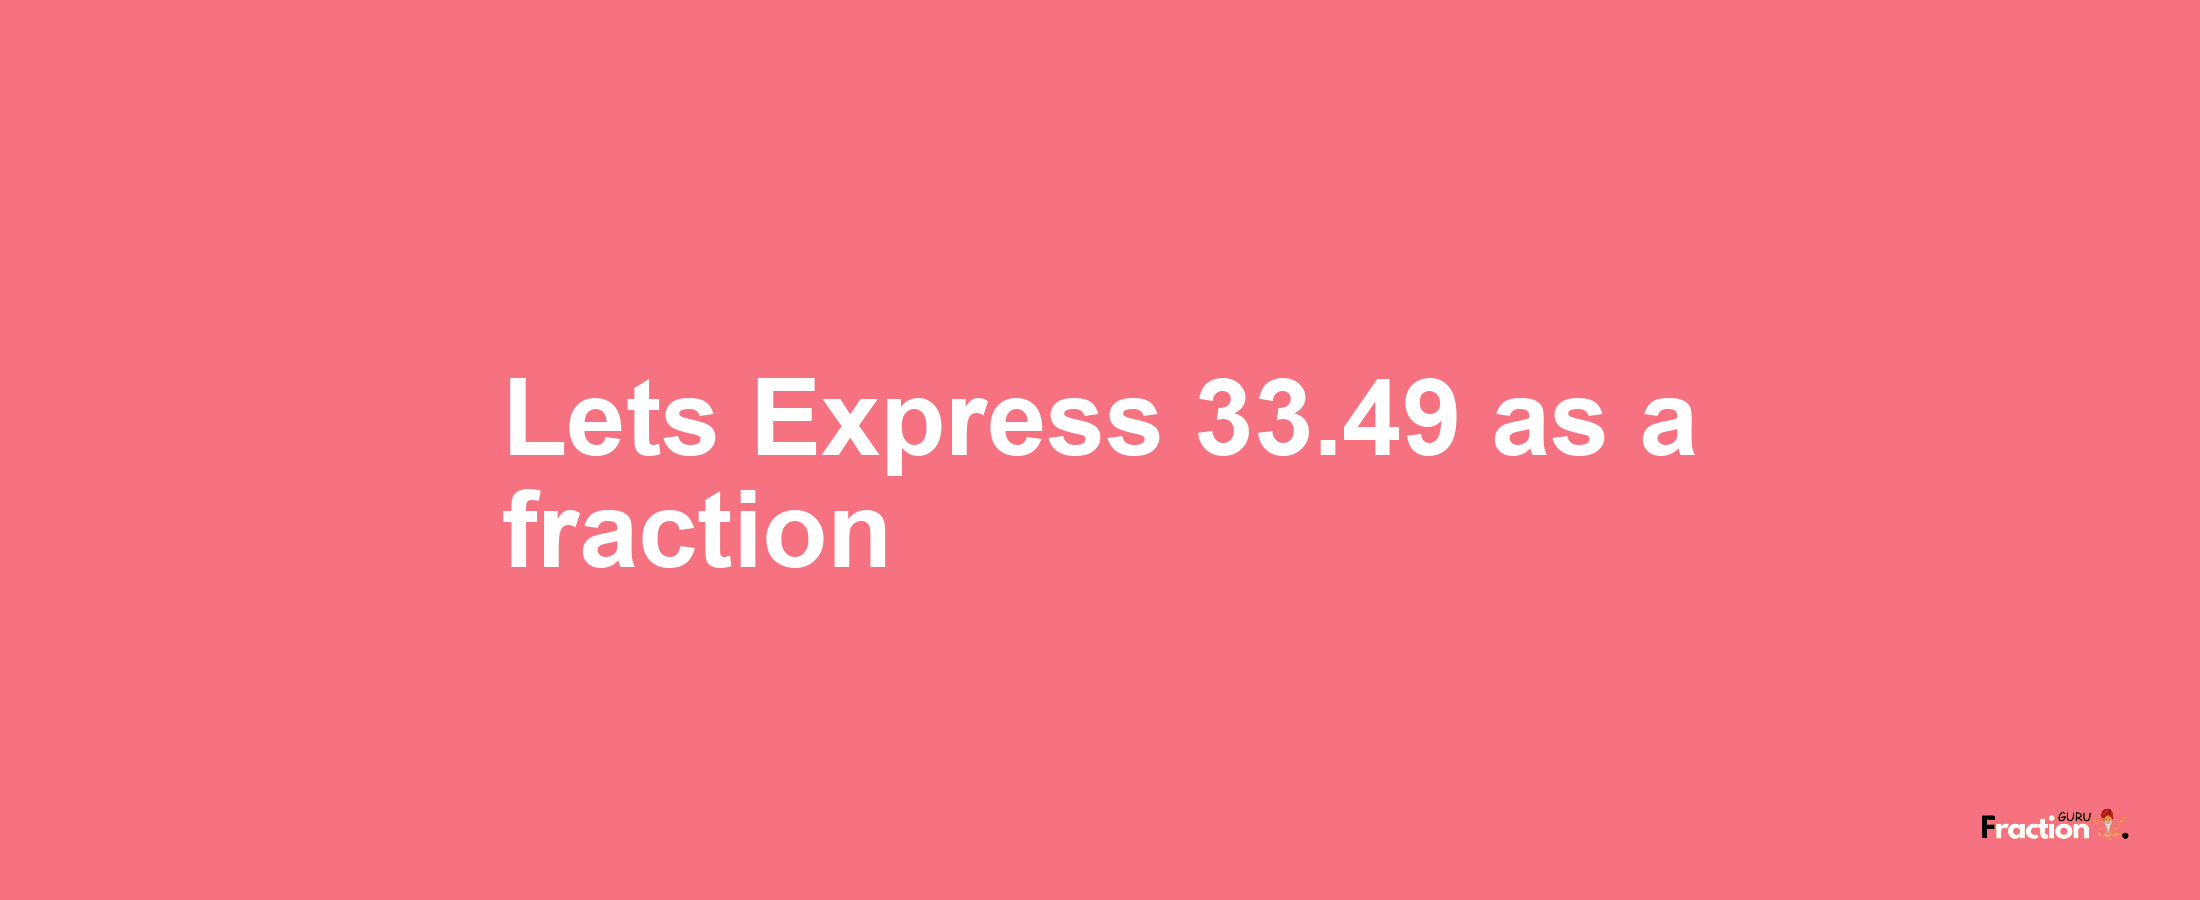 Lets Express 33.49 as afraction